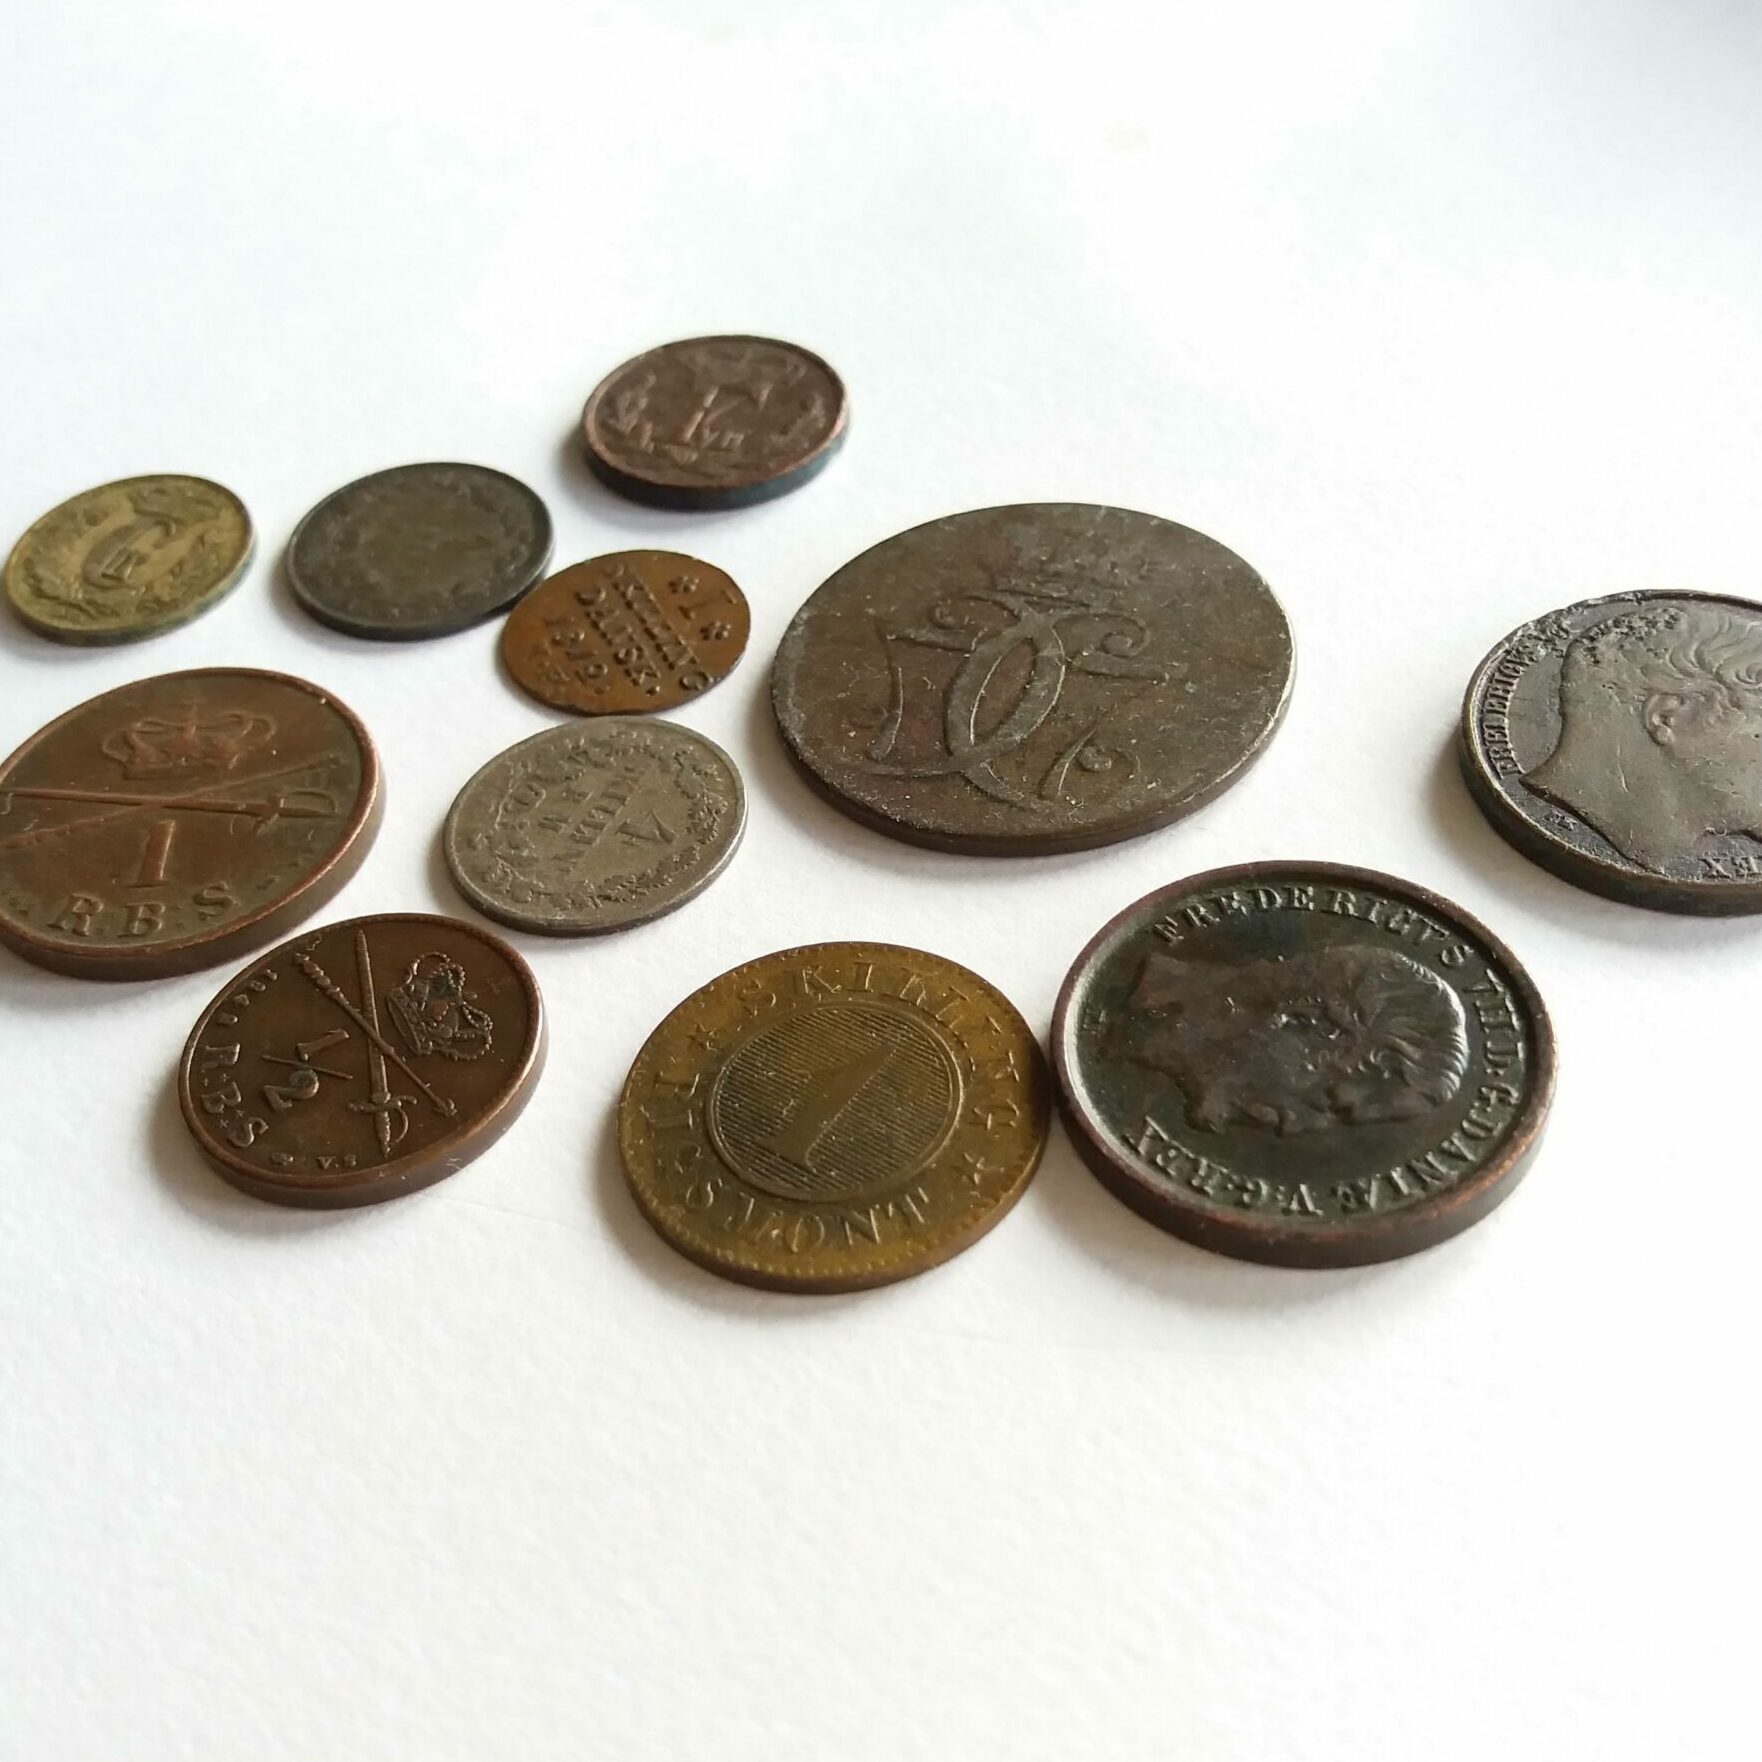 DK Coin Items - Vintage Coins